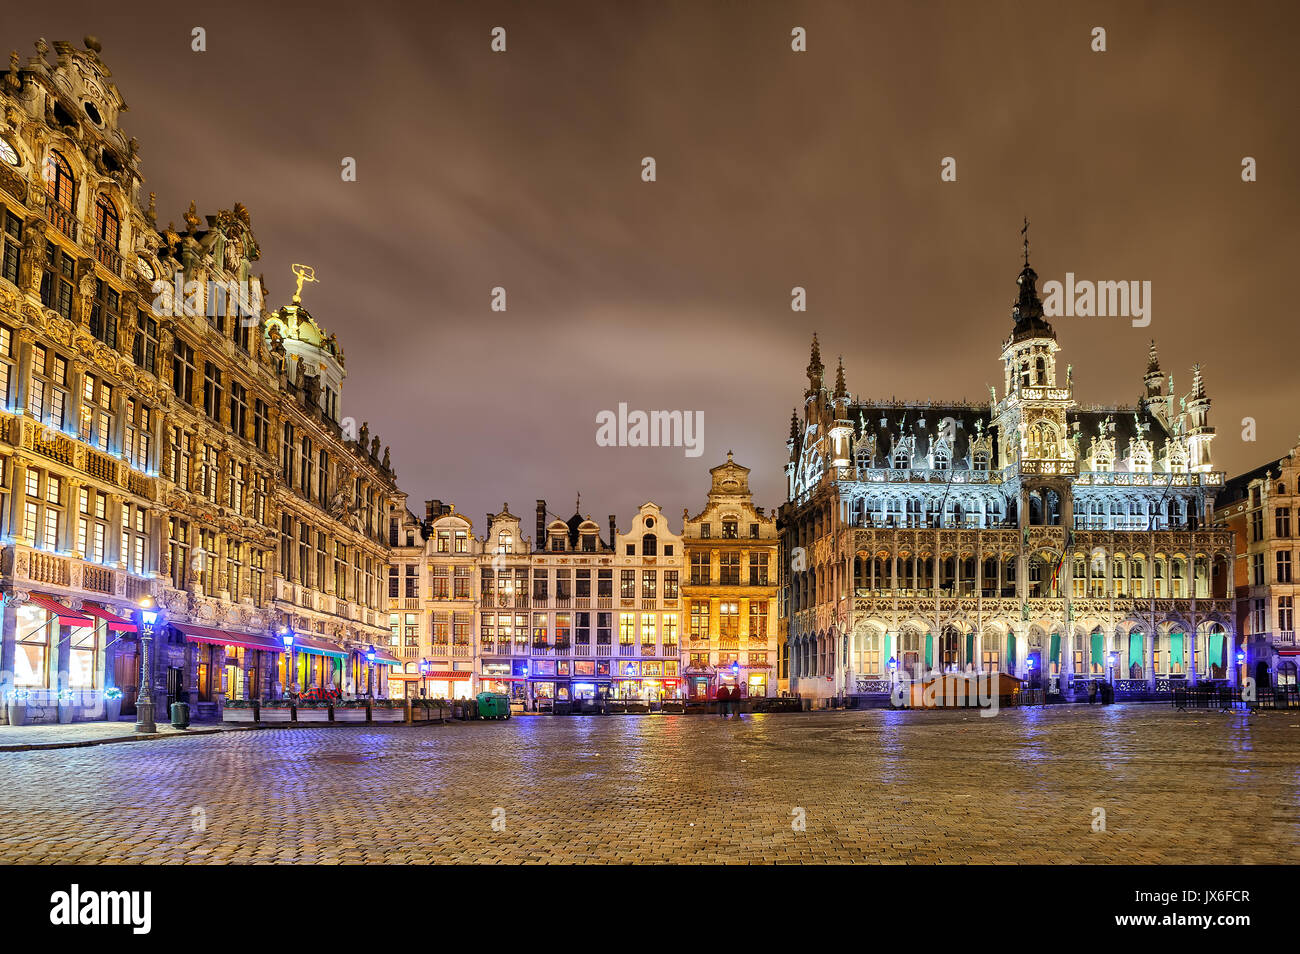 The Grand Place or Grote Markt with the Breadhouse is the central square of Brussels, Belgium, and UNESCO World Heritage Site Stock Photo